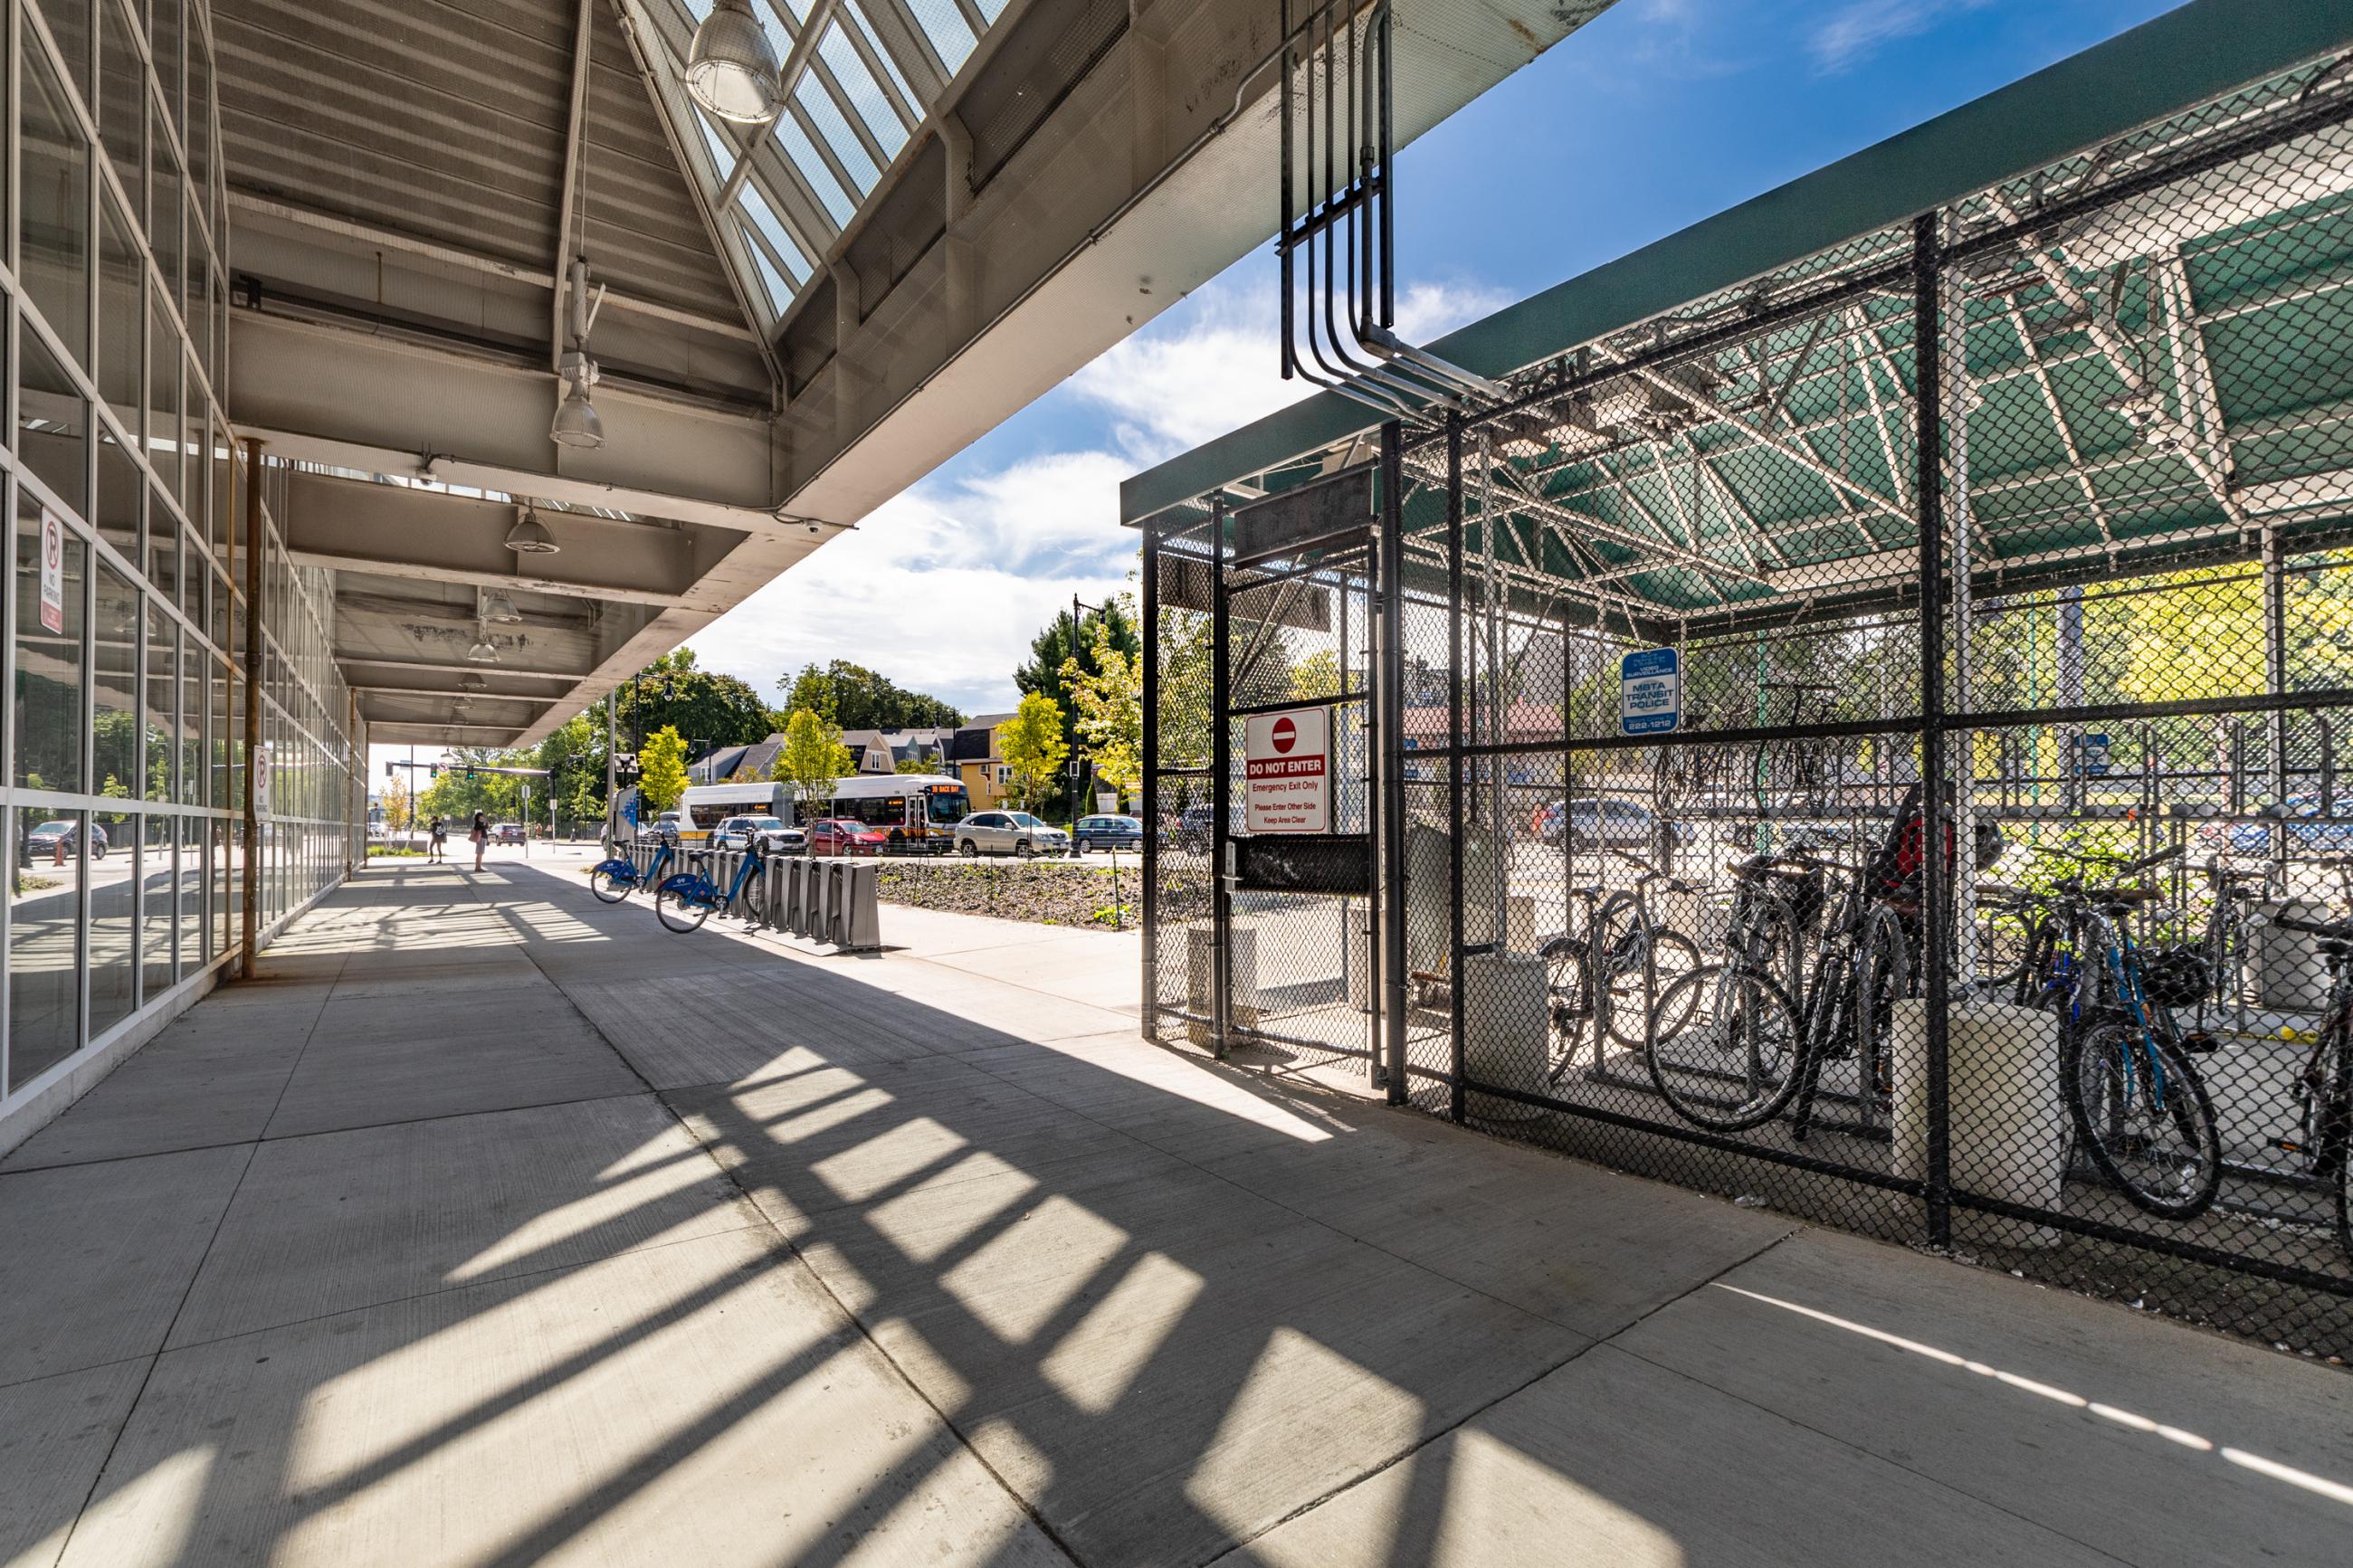 A closed pedal and park bike station with bikes parked inside at Forest Hills station